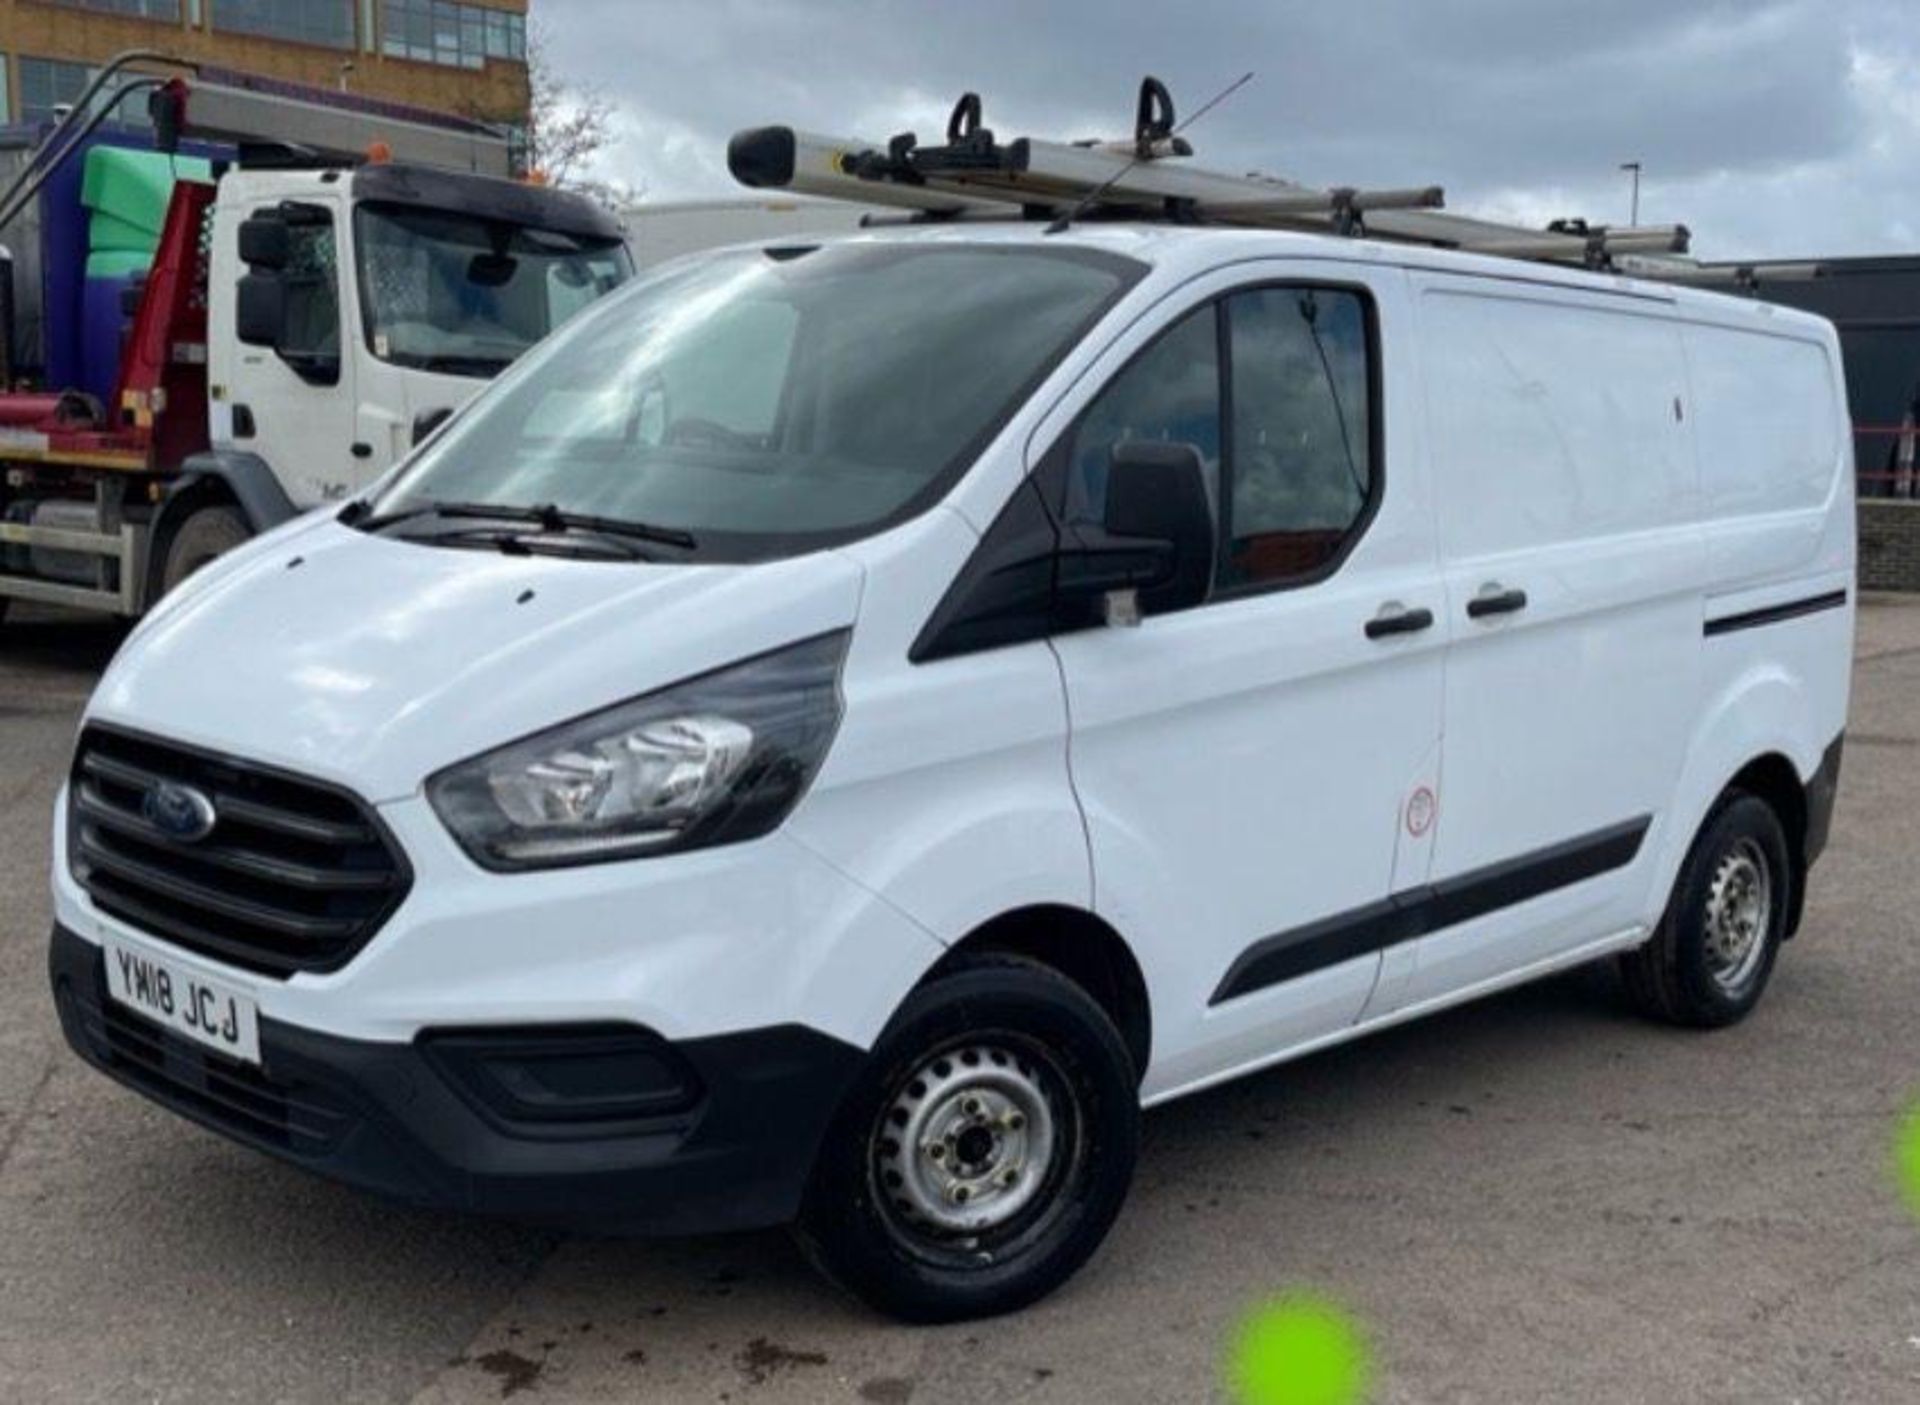 2018 FORD TRANSIT CUSTOM 280 SWB L1H1 - 134K MILES - HPI CLEAR - REDY TO GO ! - Image 2 of 16